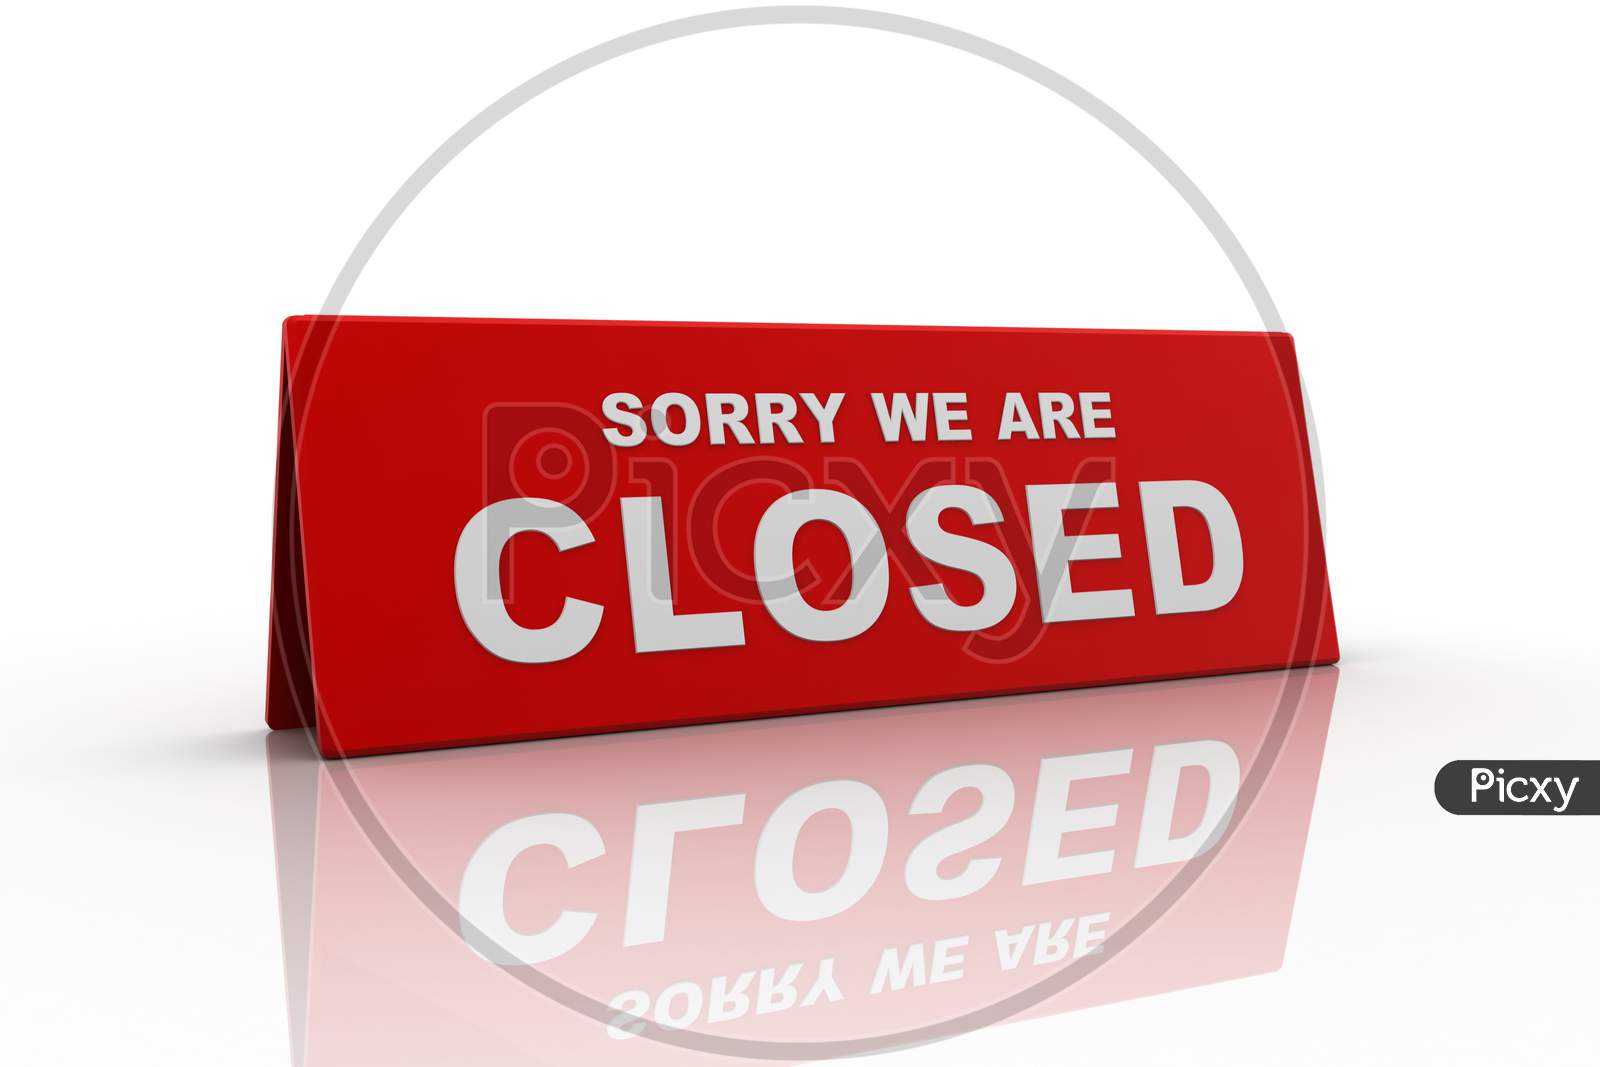 Sorry We are closed Board on White Background